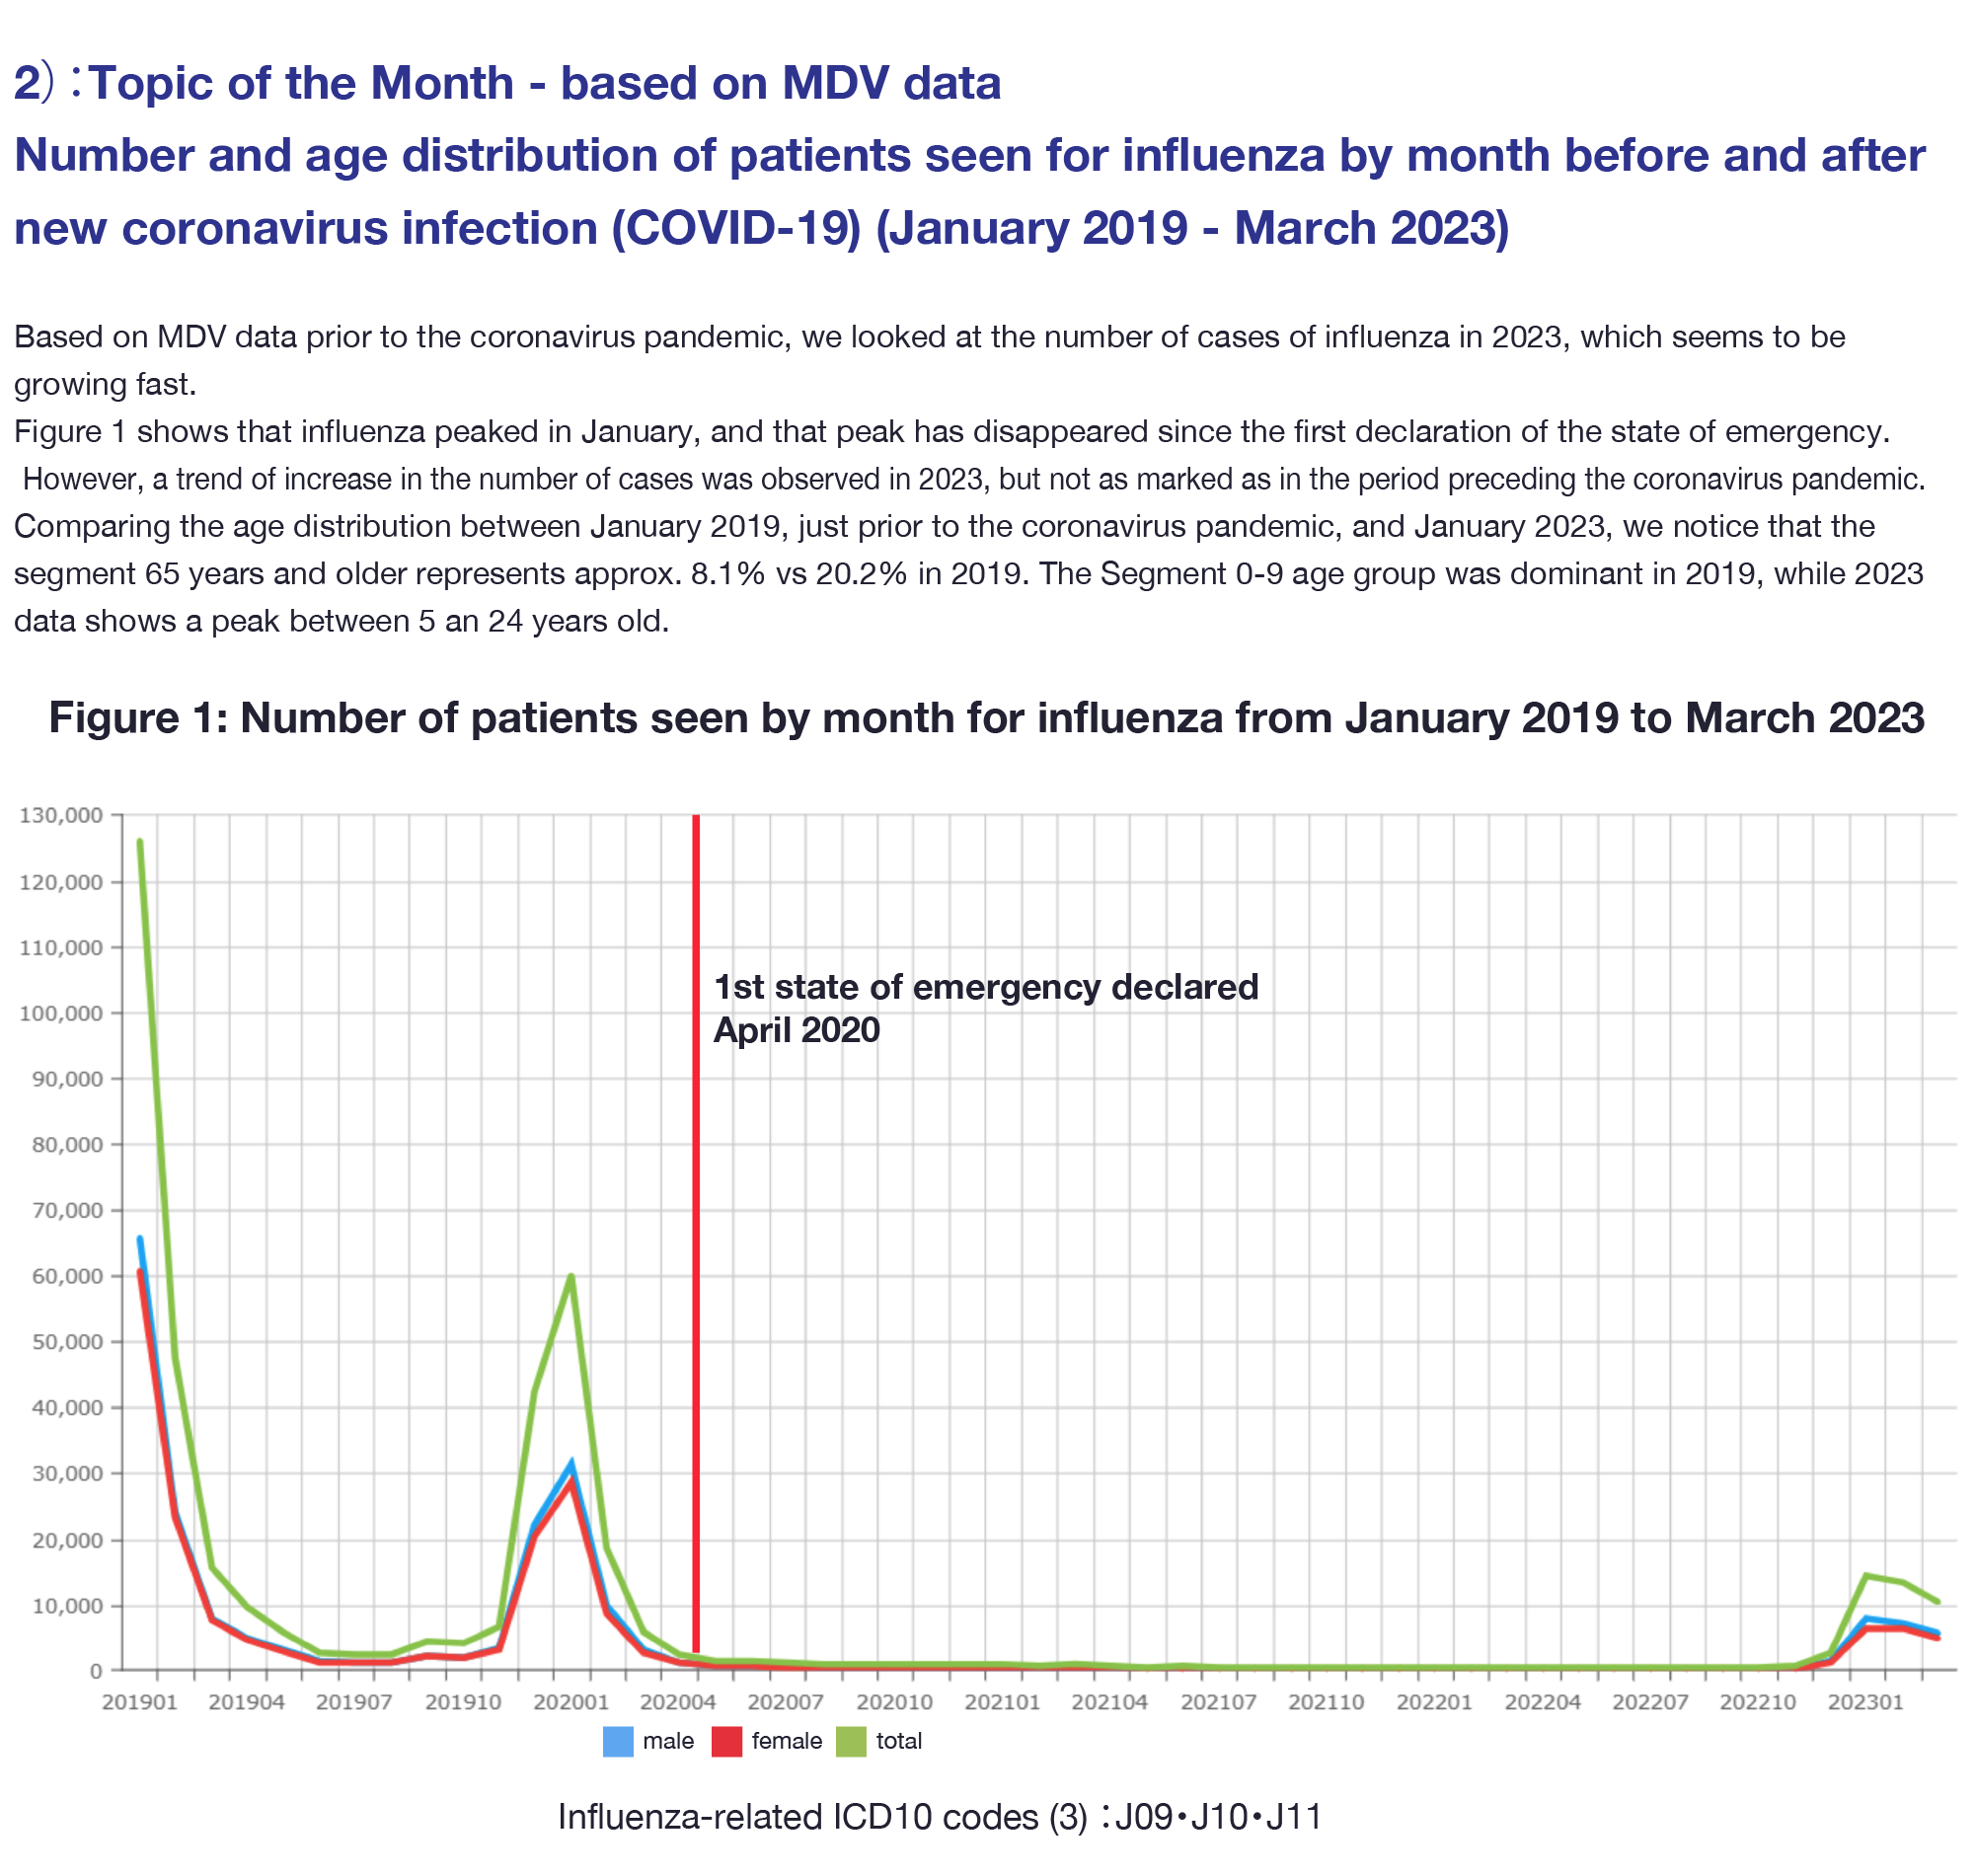 2):Topic of the Month - based on MDV data Number and age distribution of patients seen for influenza by month before and after new coronavirus infection(COVID-19(January 2019 - March 2023)